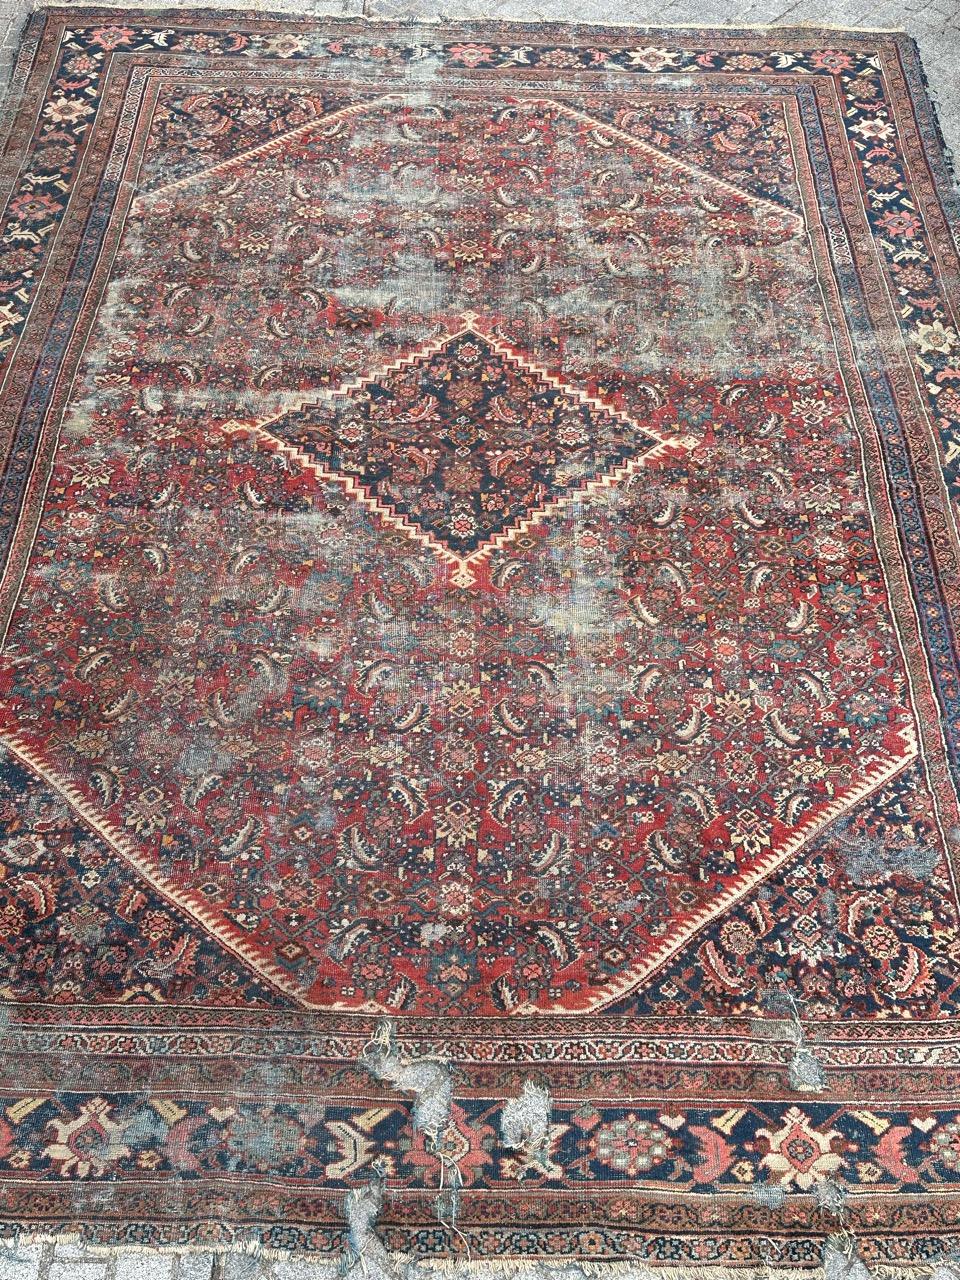 Presenting an exquisite antique distressed rug! Graced with a splendid Mahal design adorned by intricate Herati motifs, highlighted by a striking deep blue central medallion and main border, set against a field of rich red. This masterpiece is